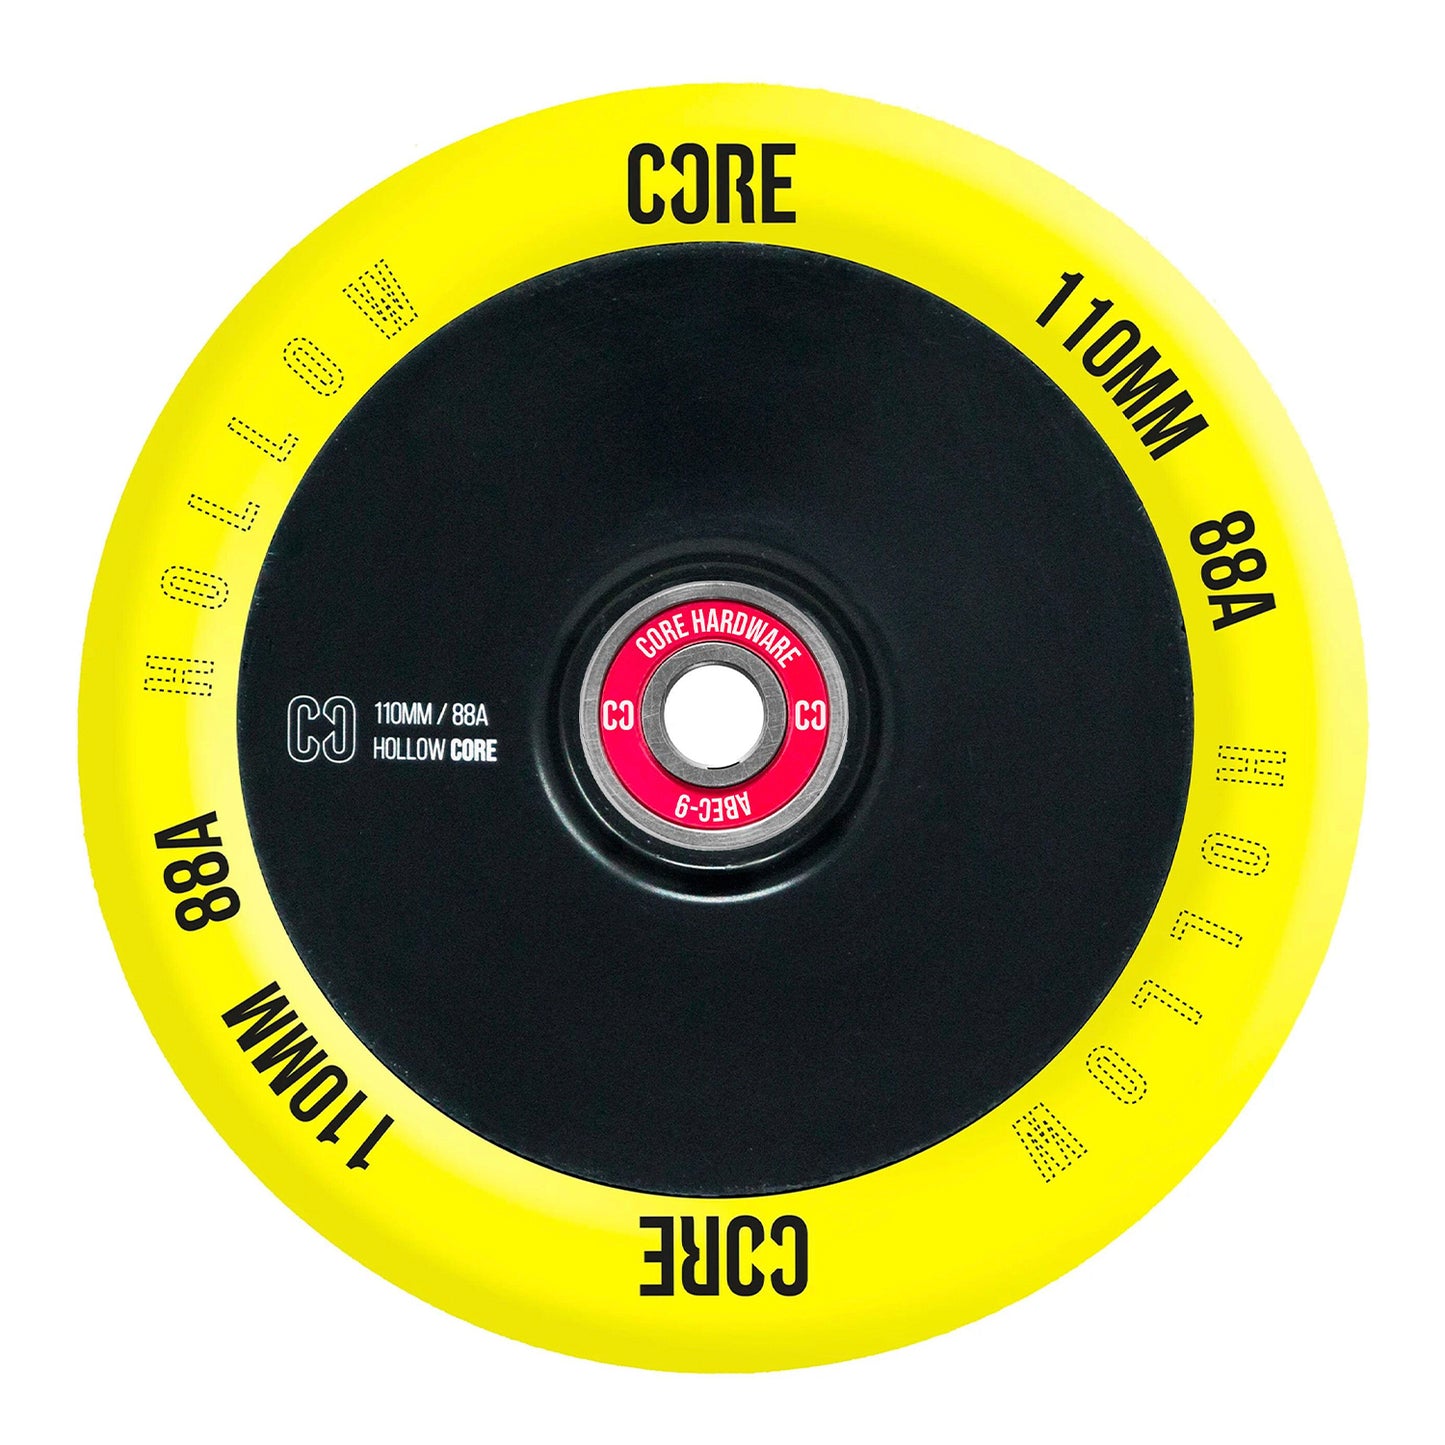 CORE Hollow Stunt Scooter Wheel V2 110mm - Yellow / Black - Prime Delux Store